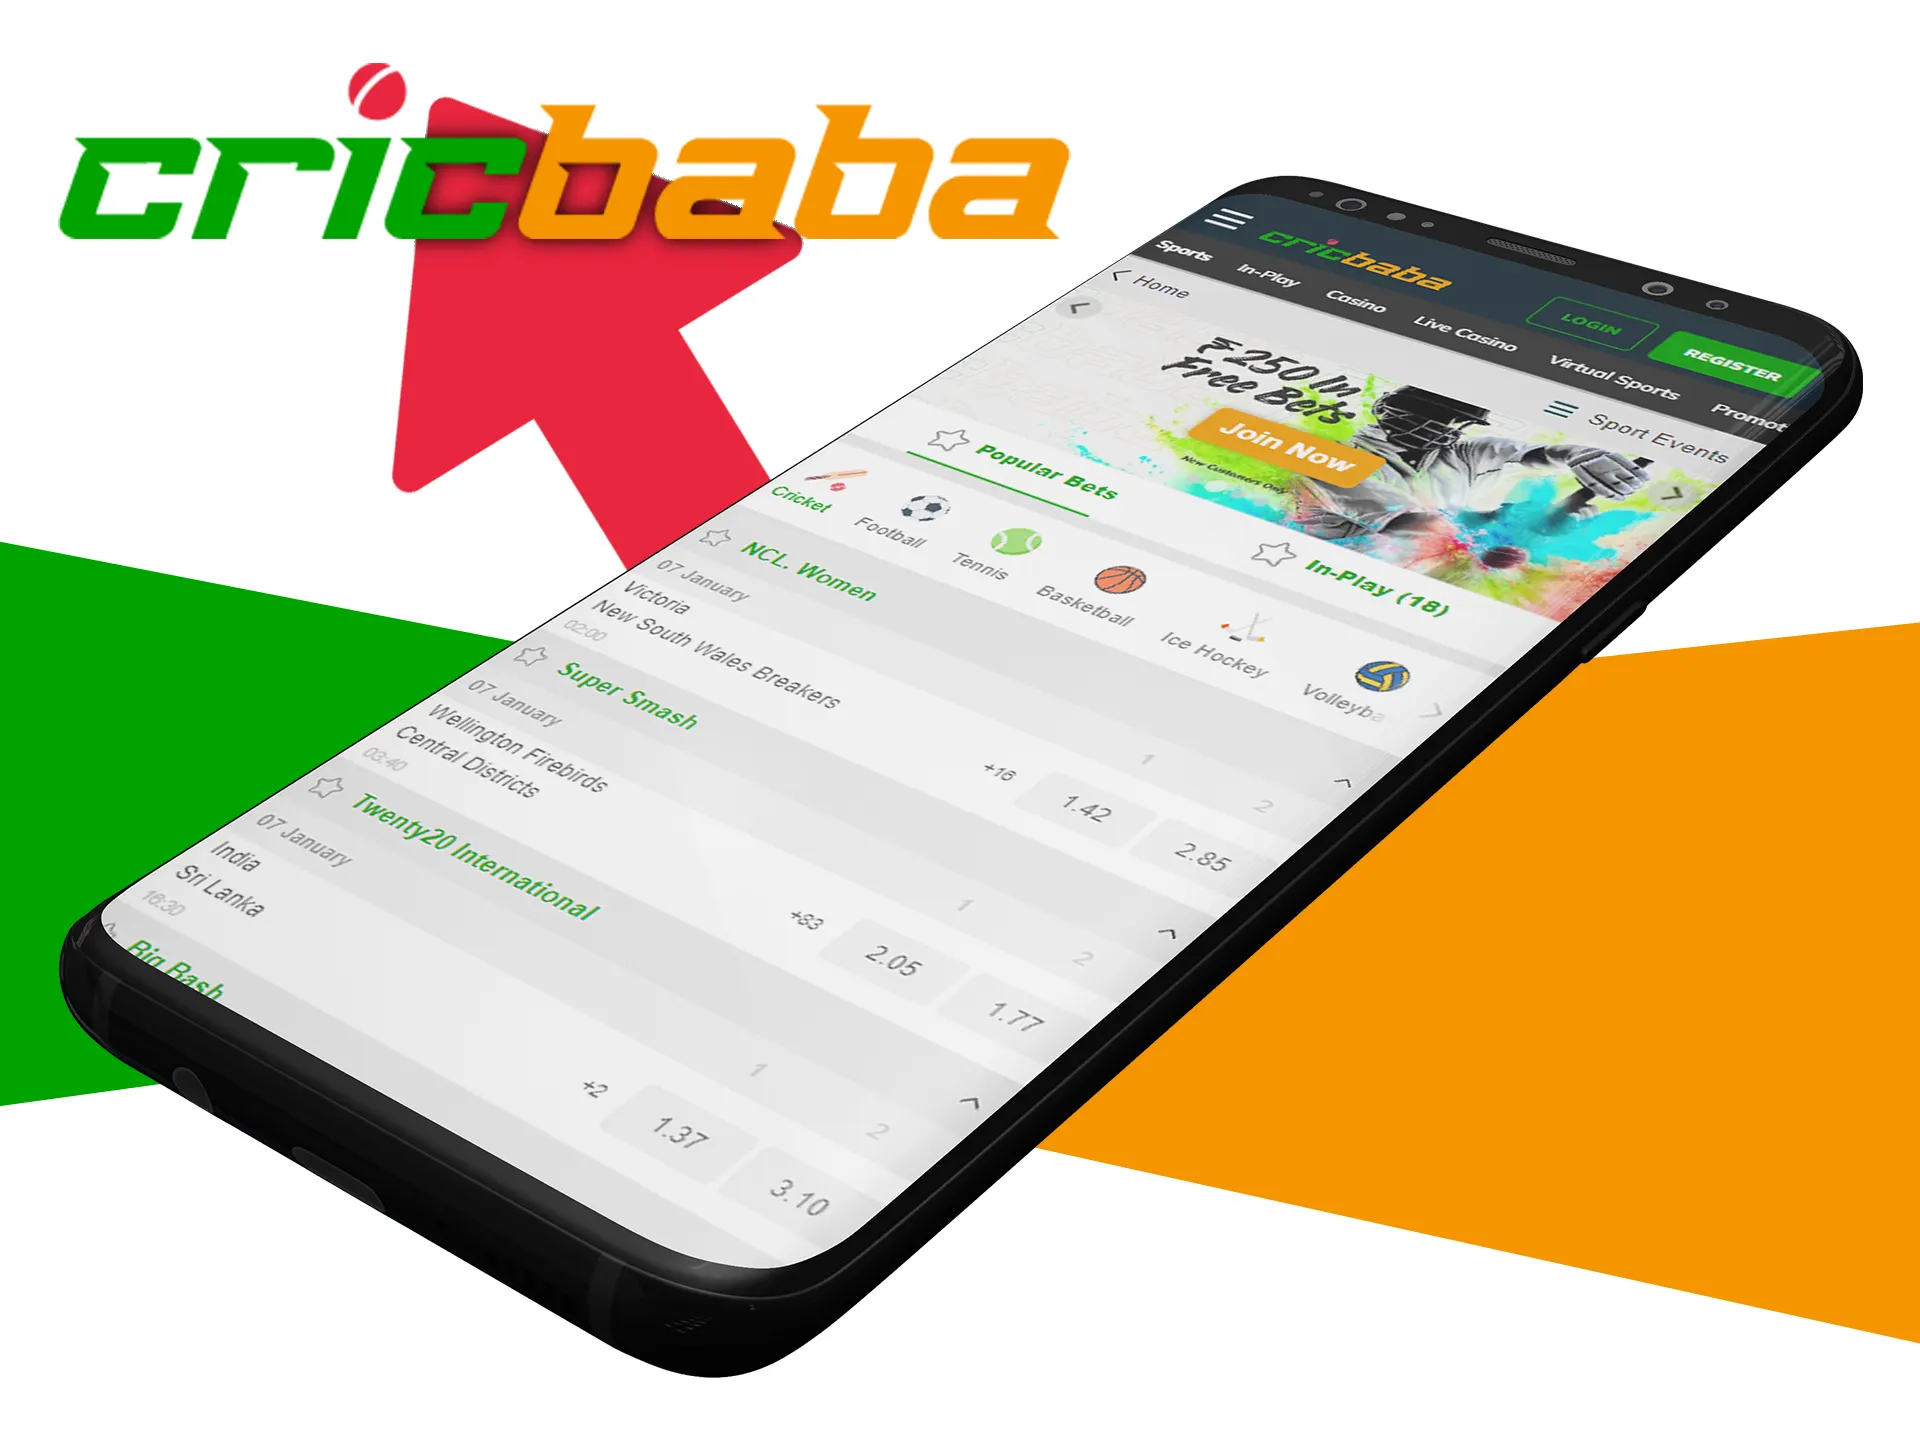 Cricbaba app updates automatically.